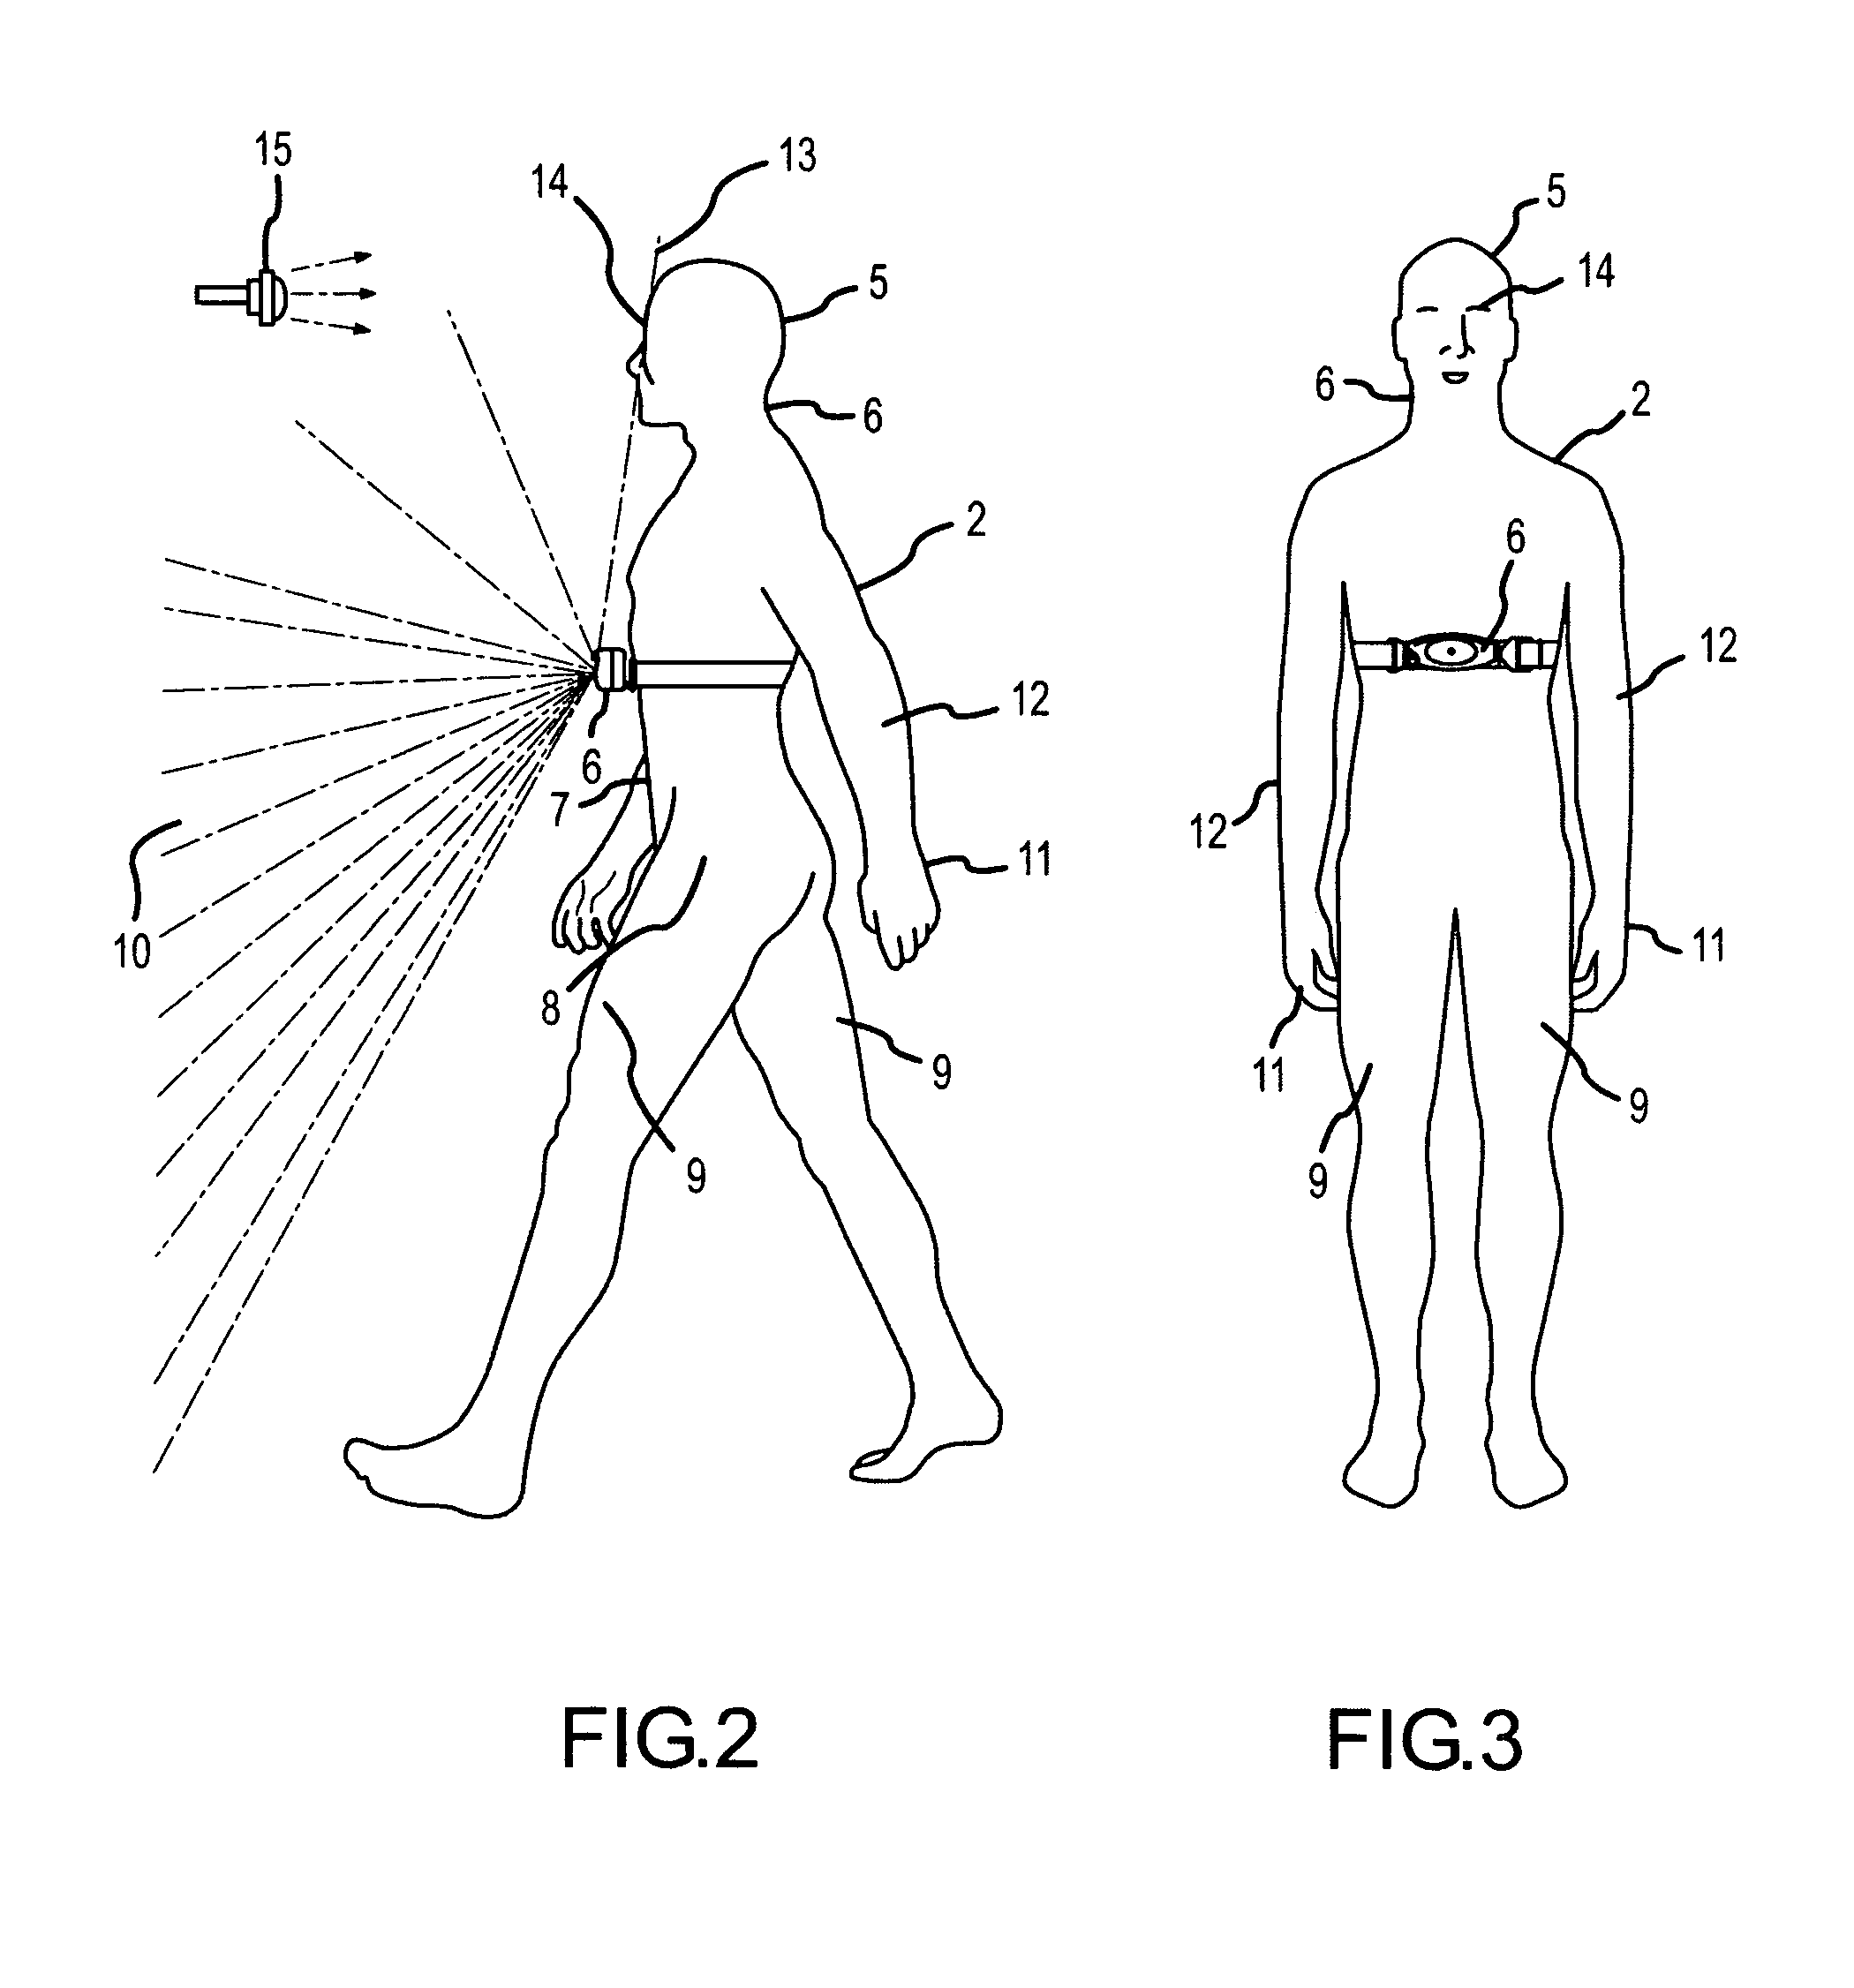 Chest height light emission system